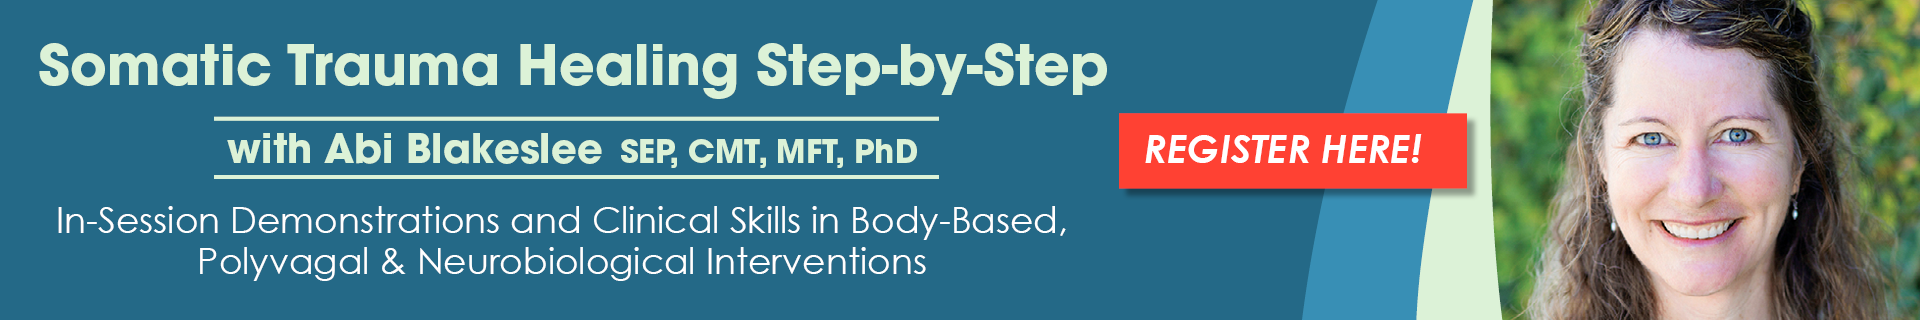 Somatic Trauma Healing Step-by-Step with Abi Blakeslee: In-Session Demonstrations and Clinical Skills in Body-Based, Polyvagal & Neurobiological Interventions